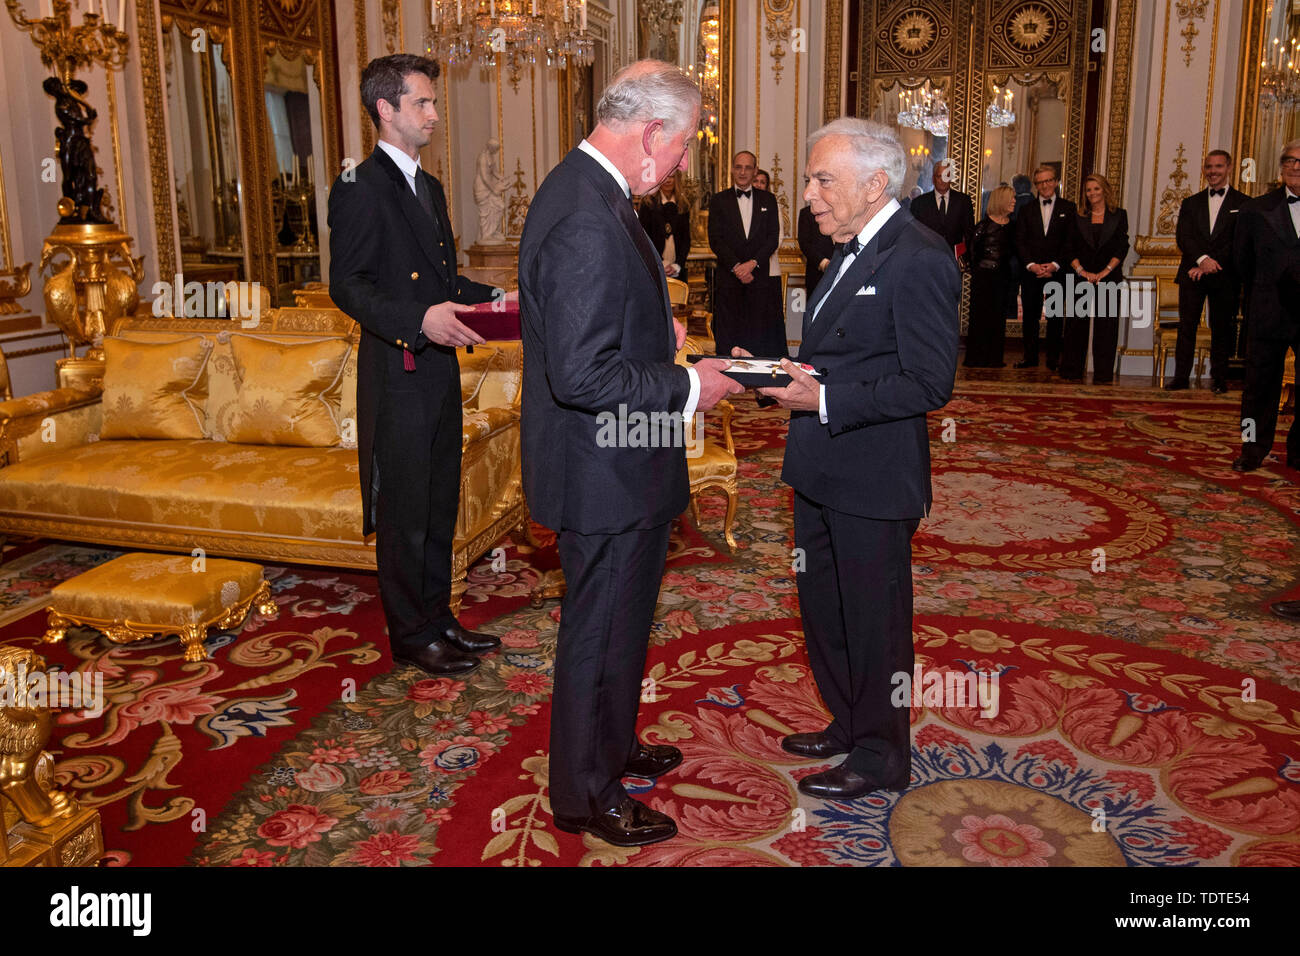 The Prince of Wales presents designer Ralph Lauren with his honorary KBE (Knight Commander of the Order of the British Empire) for Services to Fashion in a private ceremony at Buckingham Palace. Stock Photo